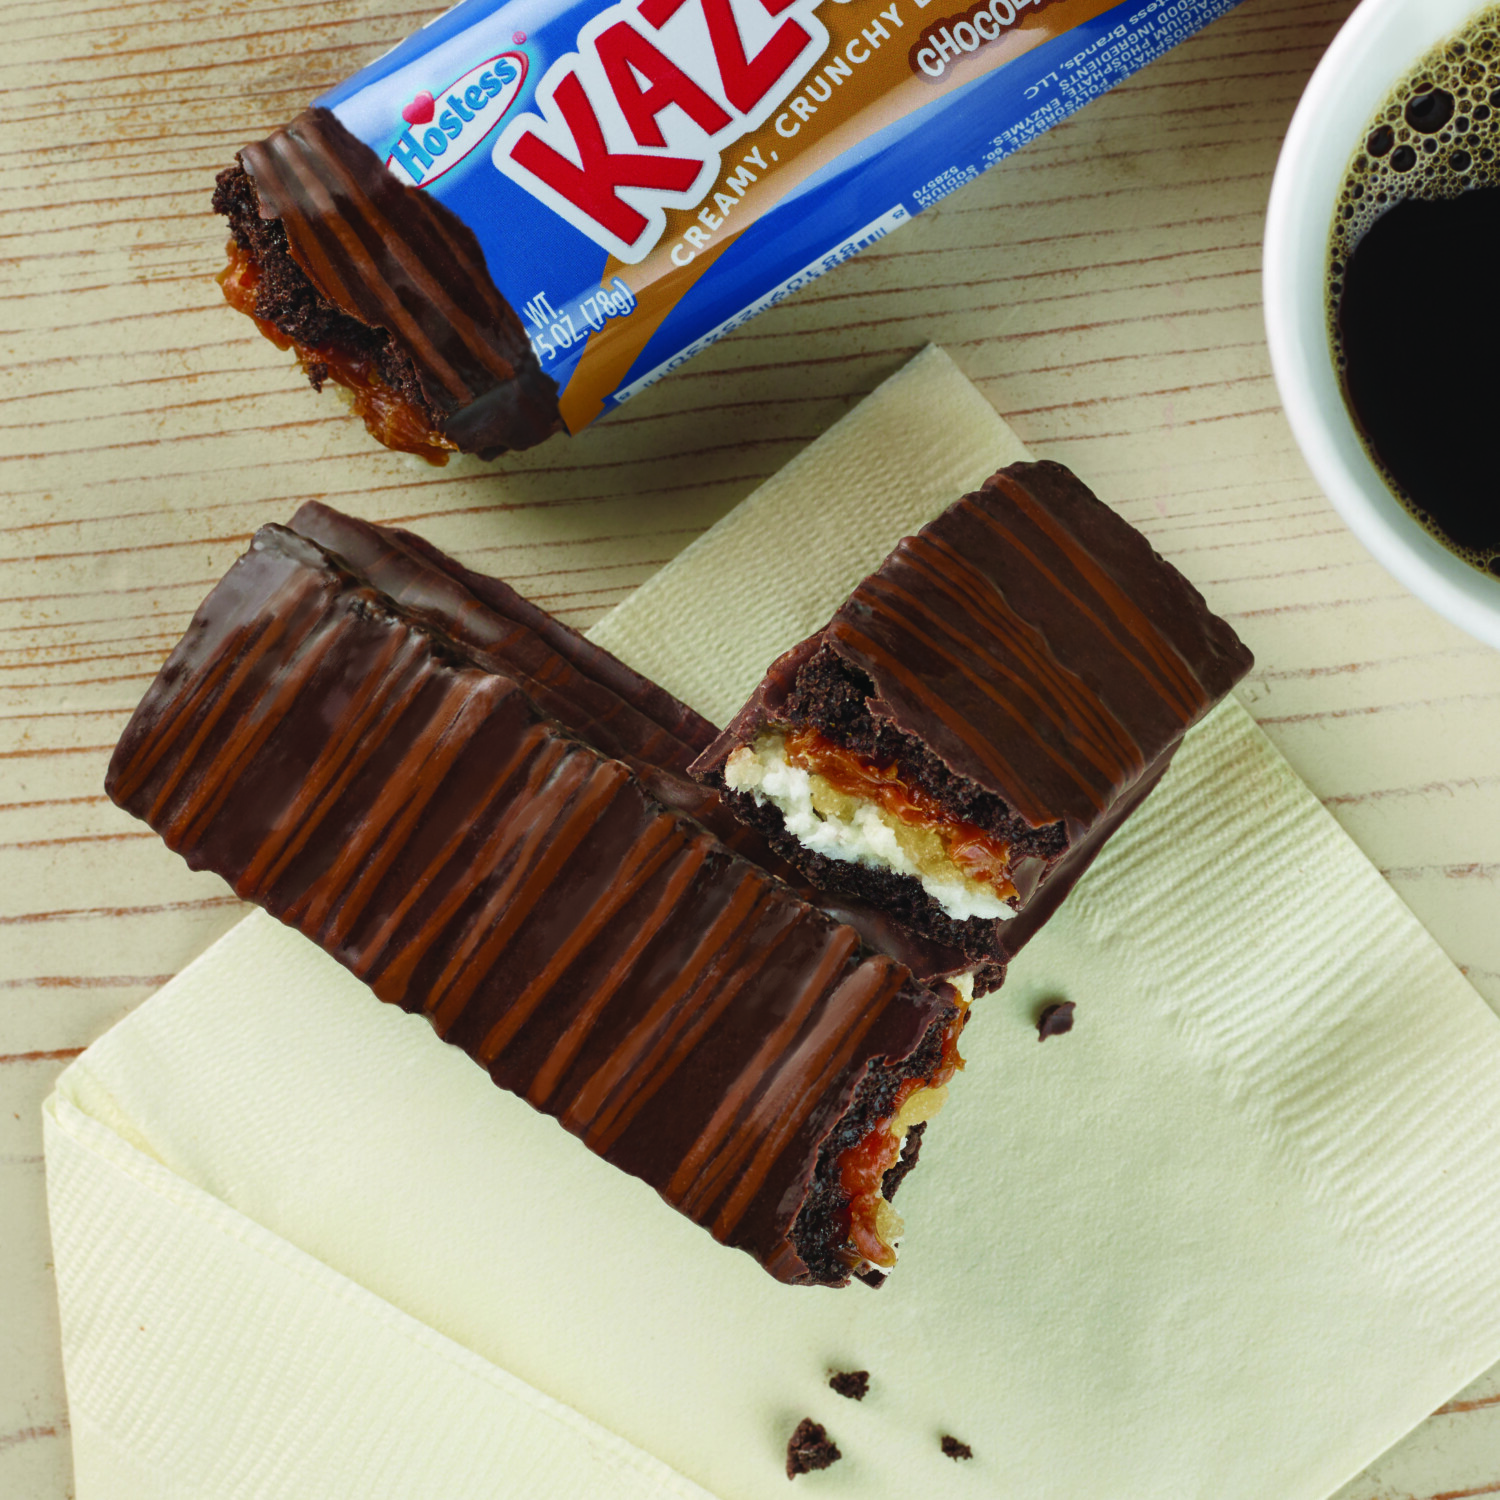 New Hostess Kazbars turn the brand's snack cakes into candy bars